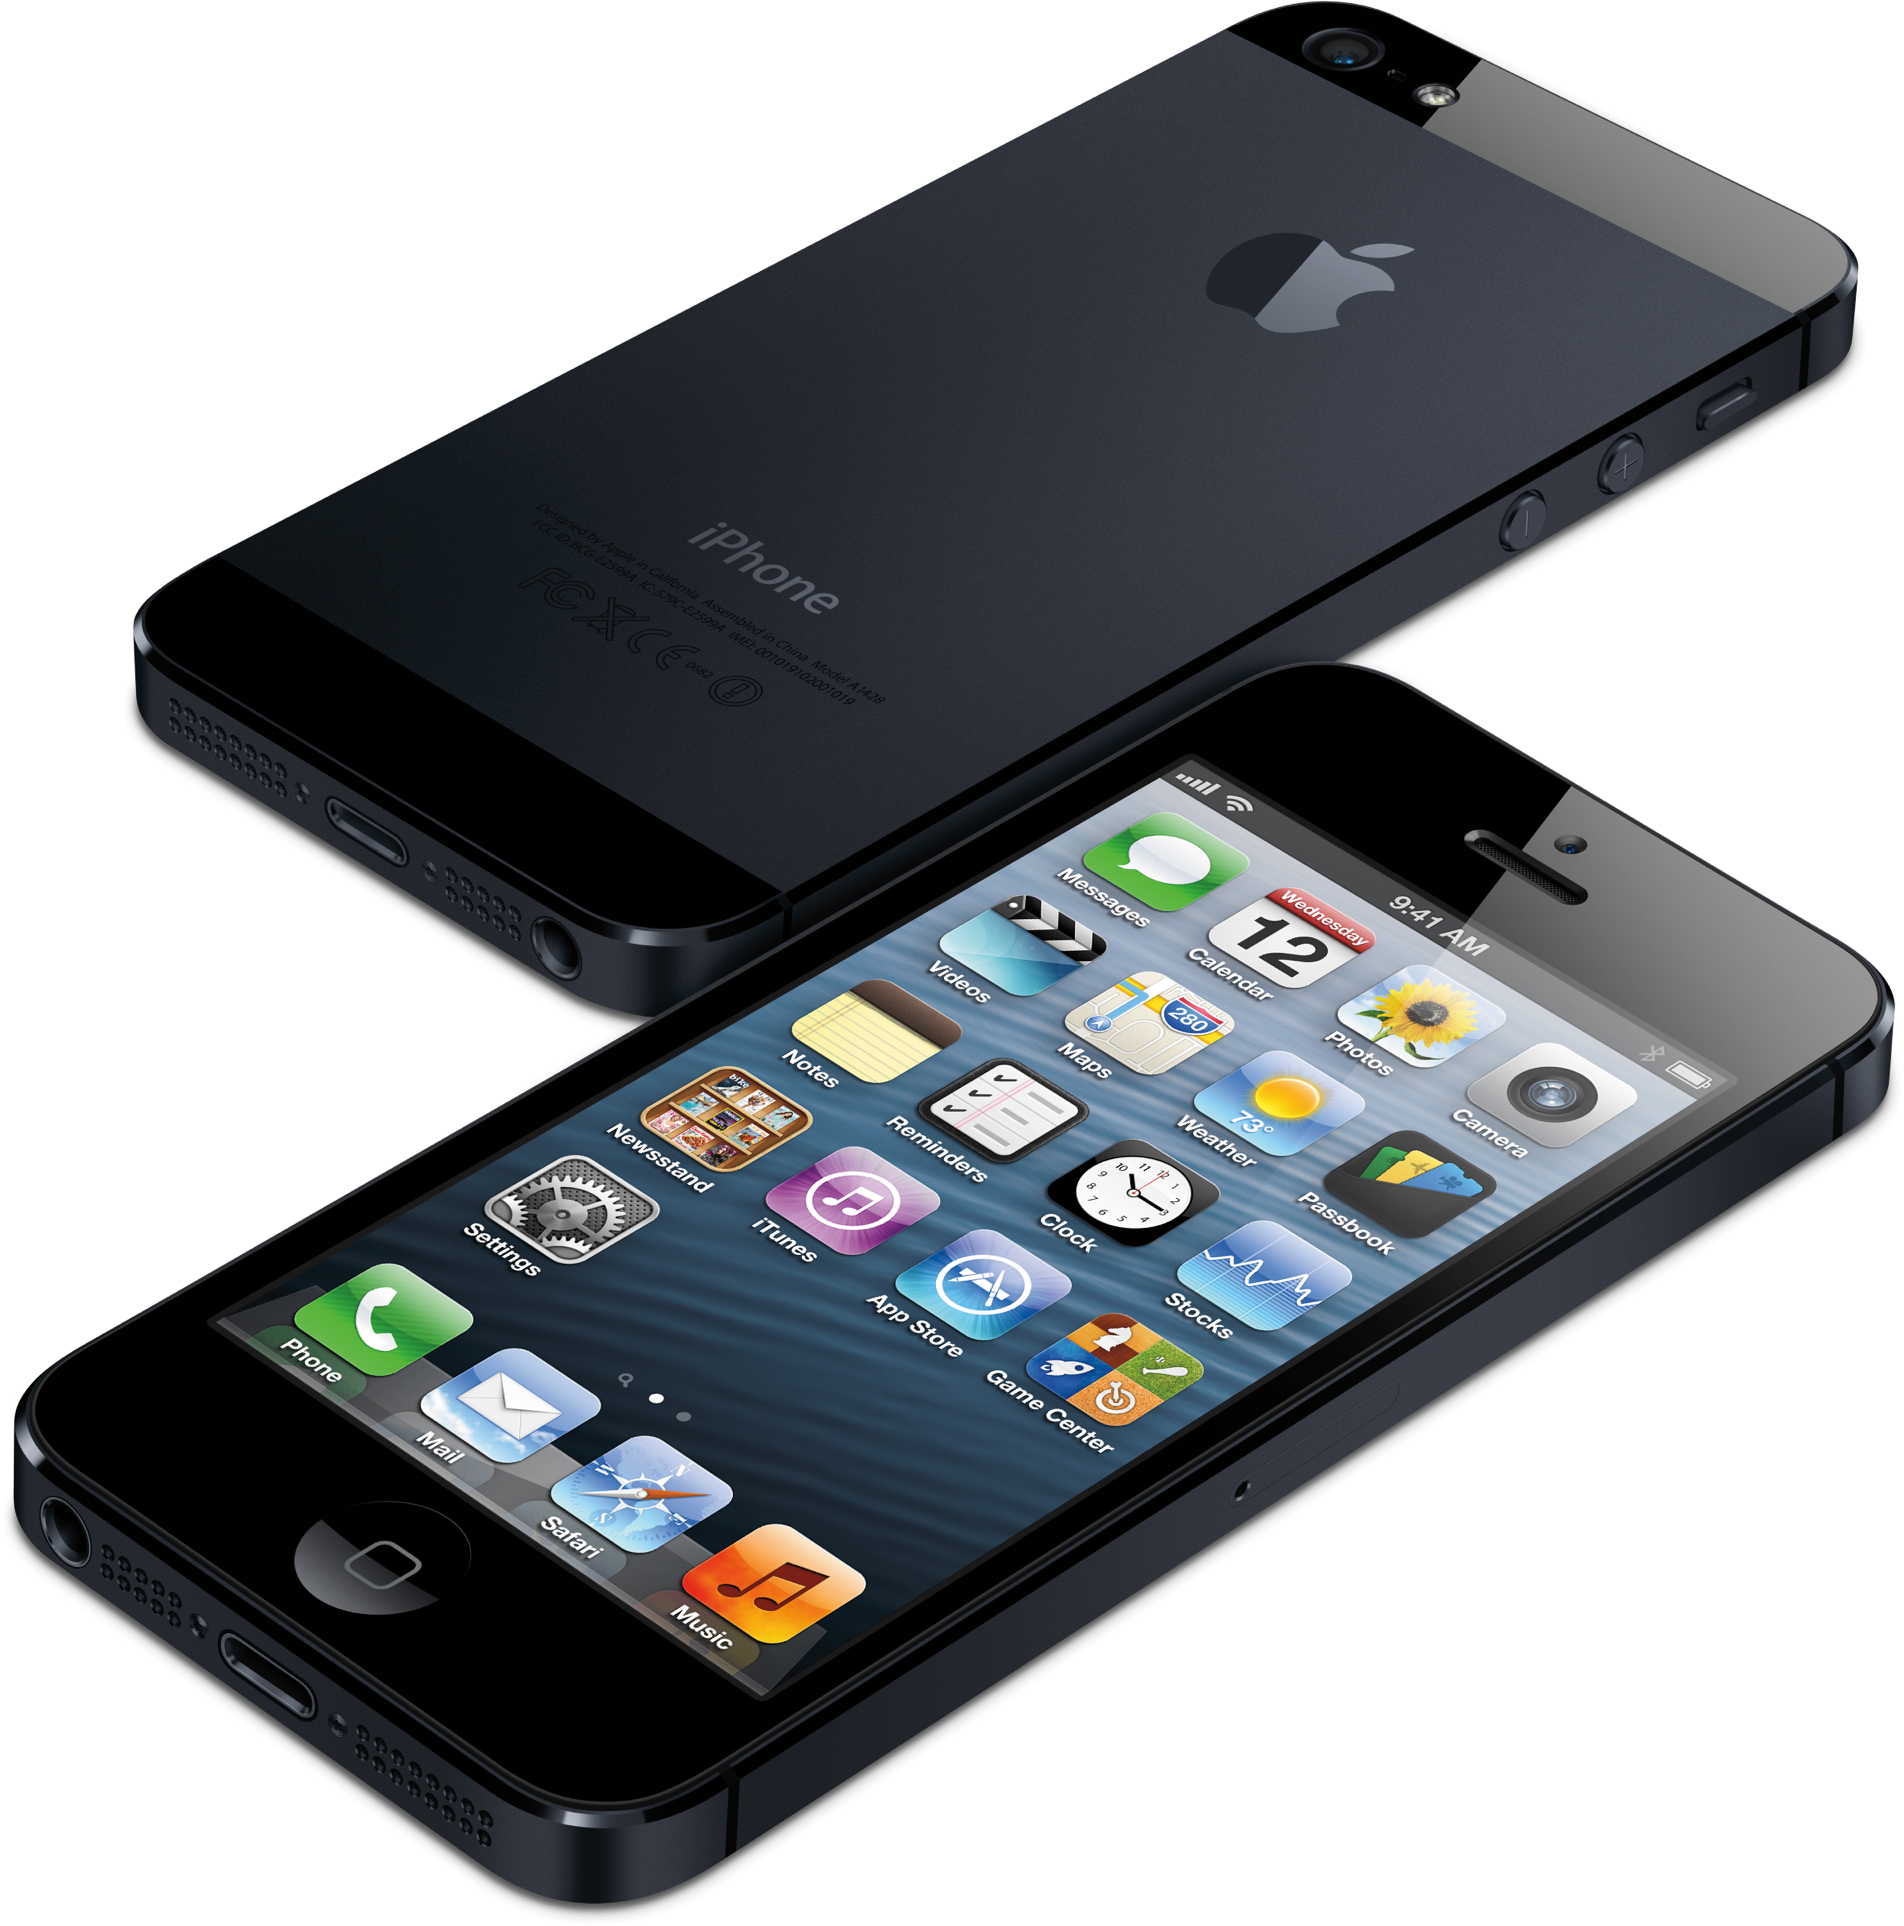 iPhone 5 is now a classic product